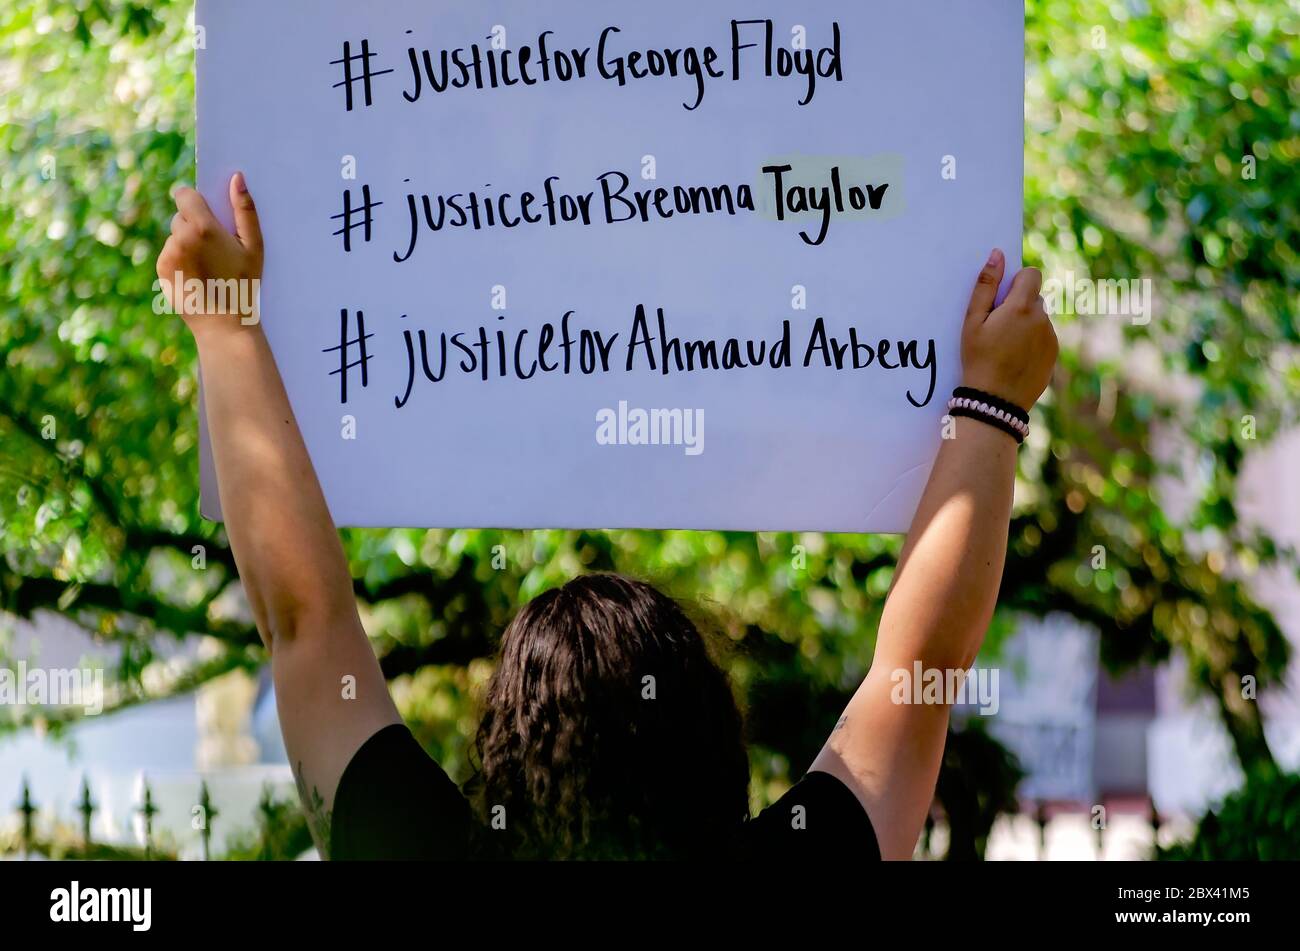 A protestor holds up a sign while at a protest against police brutality, June 4, 2020, at Memorial Park in Mobile, Alabama. Stock Photo